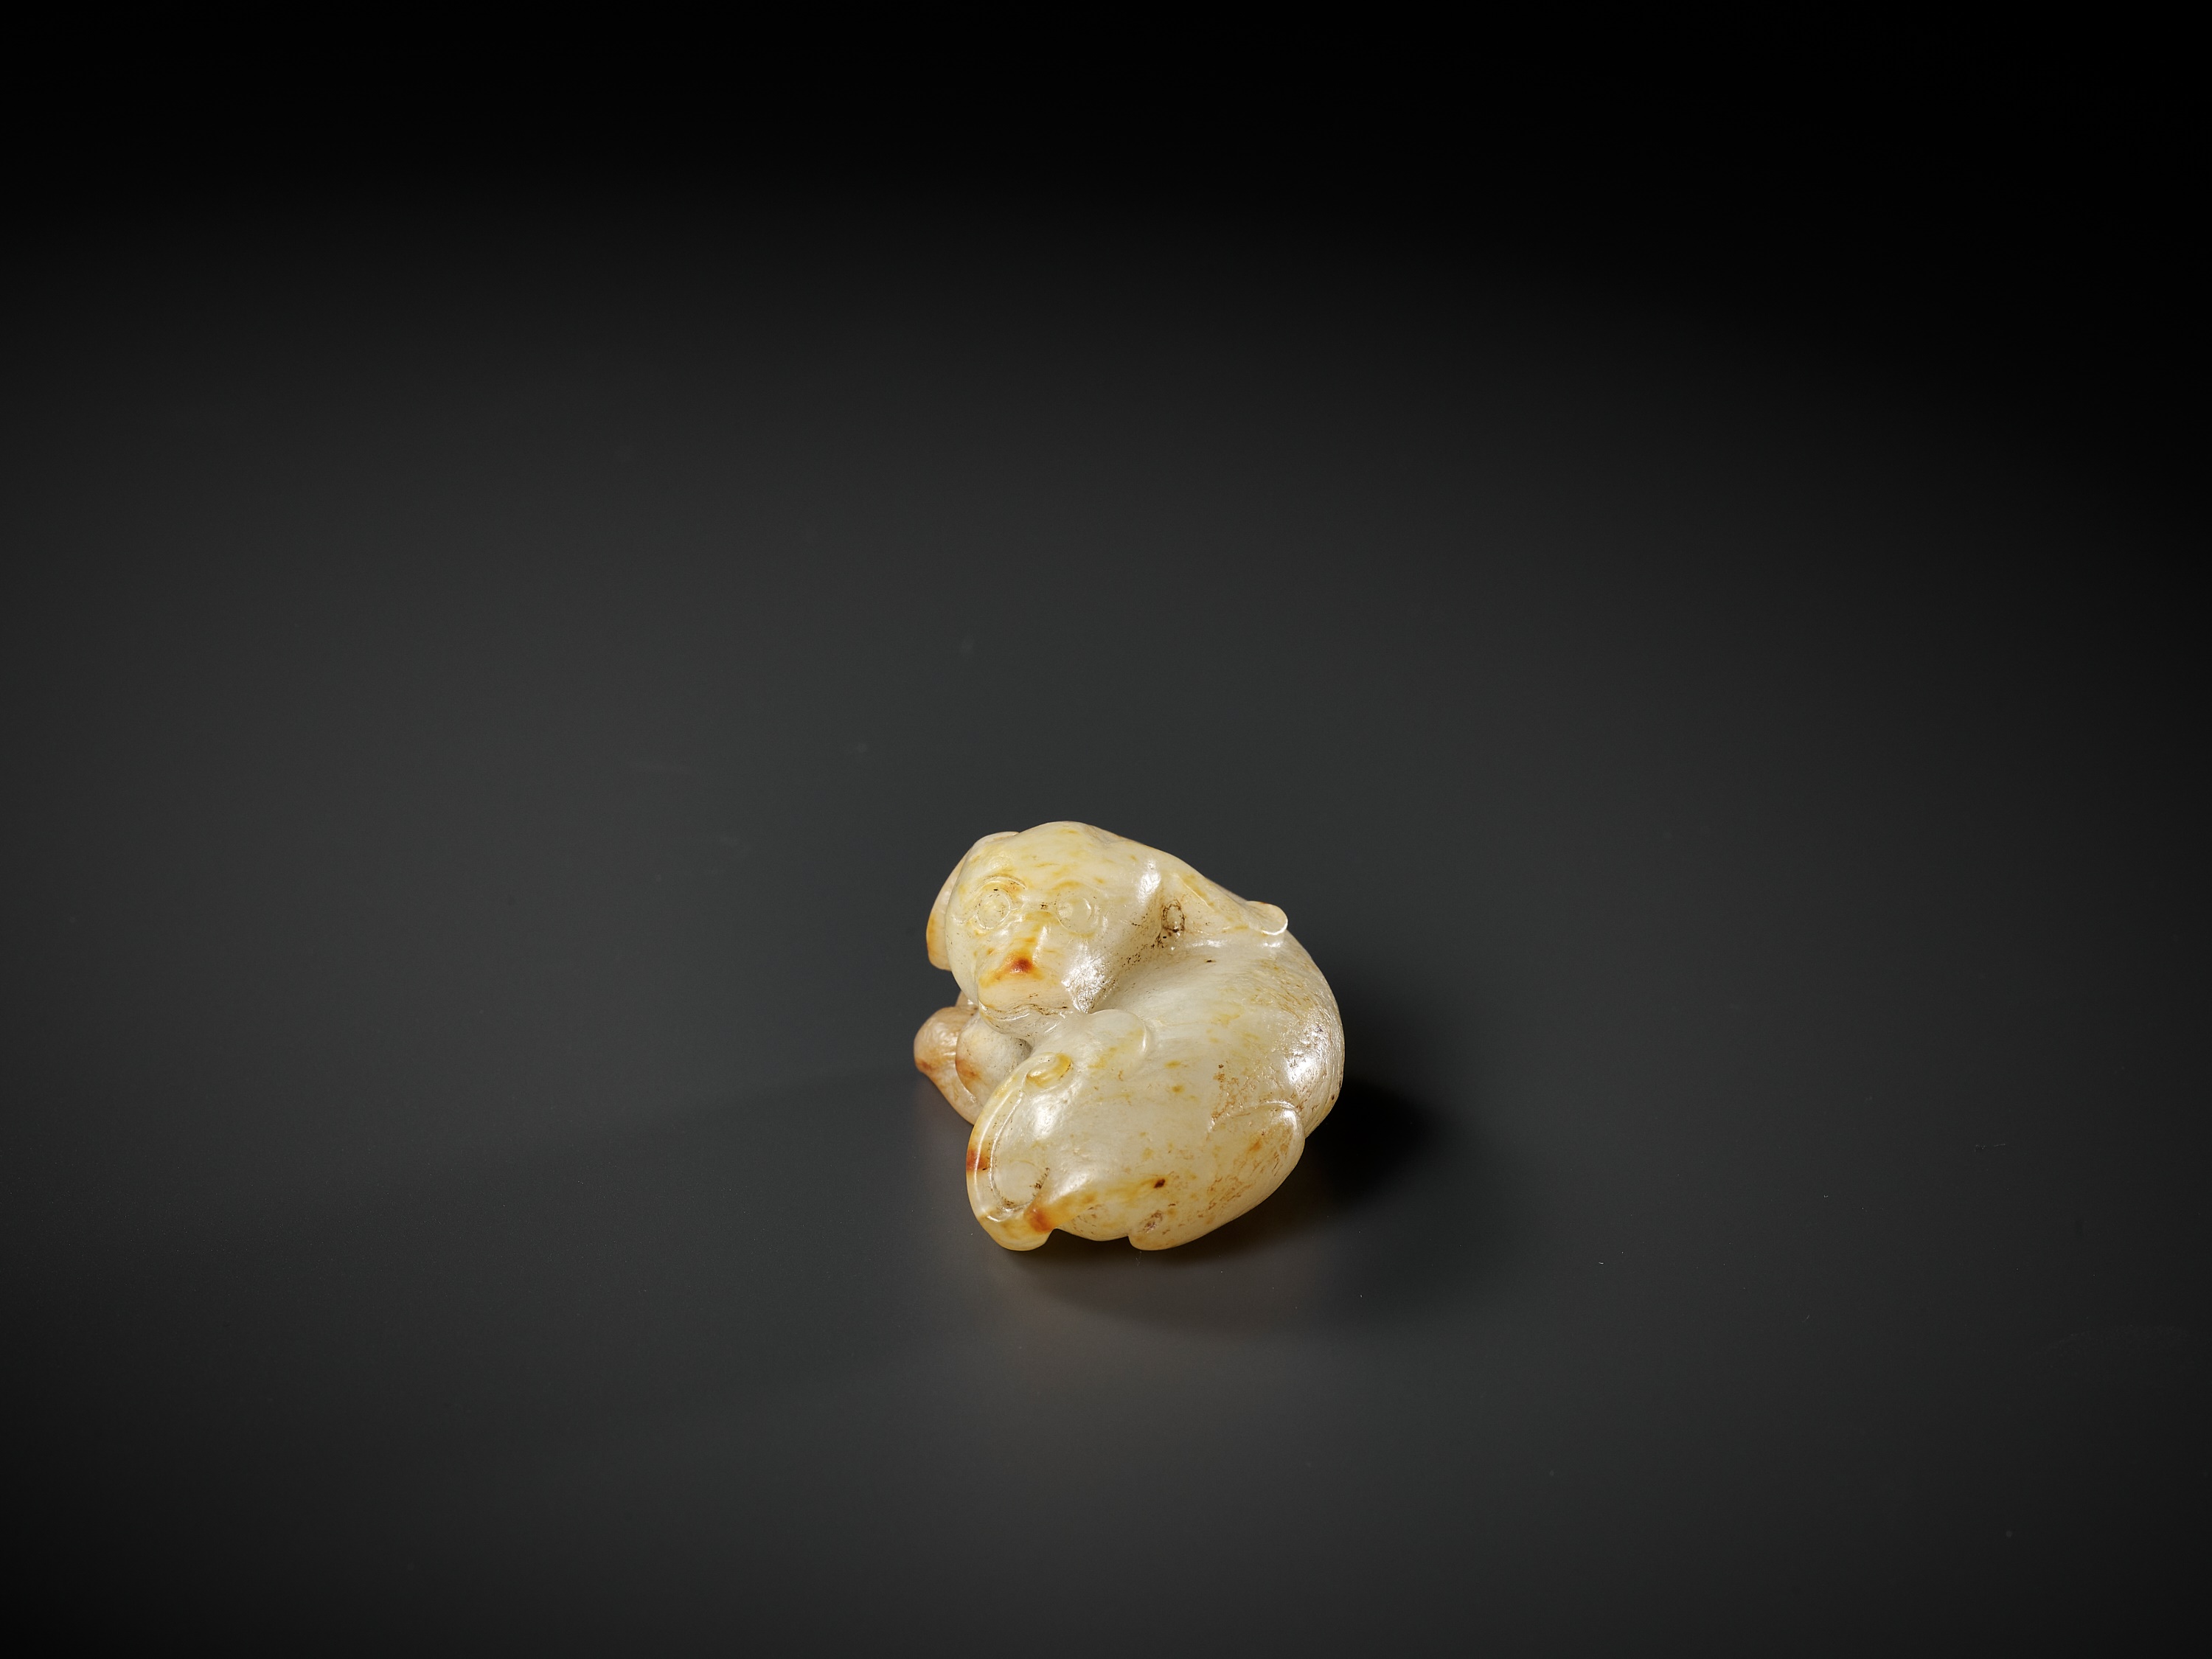 A PALE CELADON AND RUSSET JADE FIGURE OF A DOG, 17TH-18TH CENTURY - Image 8 of 10